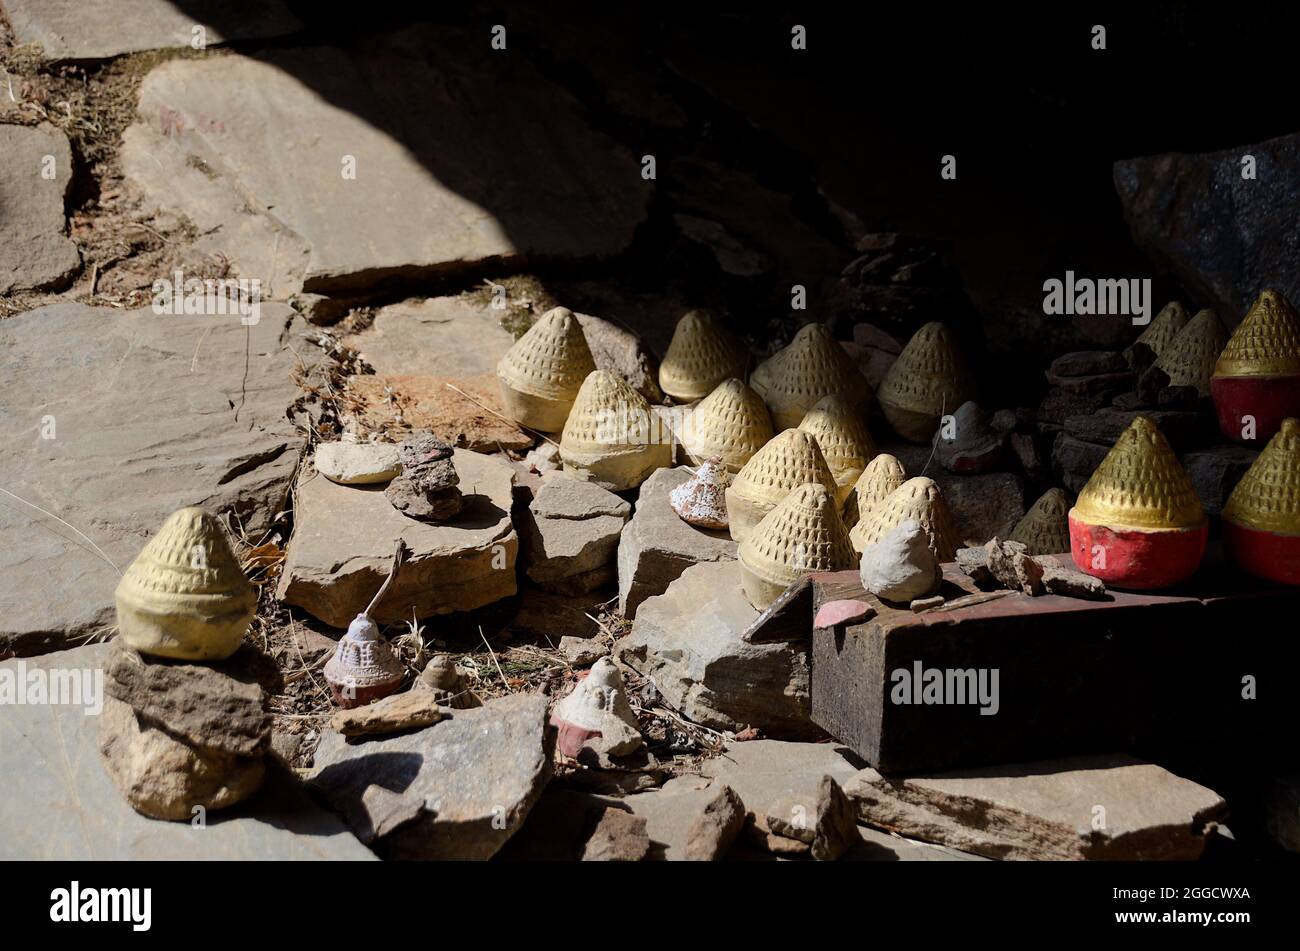 Collection of Tsa-Tsas: clay votives in the shape of cylindrical cones or stupas, placed along the Paro Taktsang (Tiger Nest's) trail, Bhutan Stock Photo